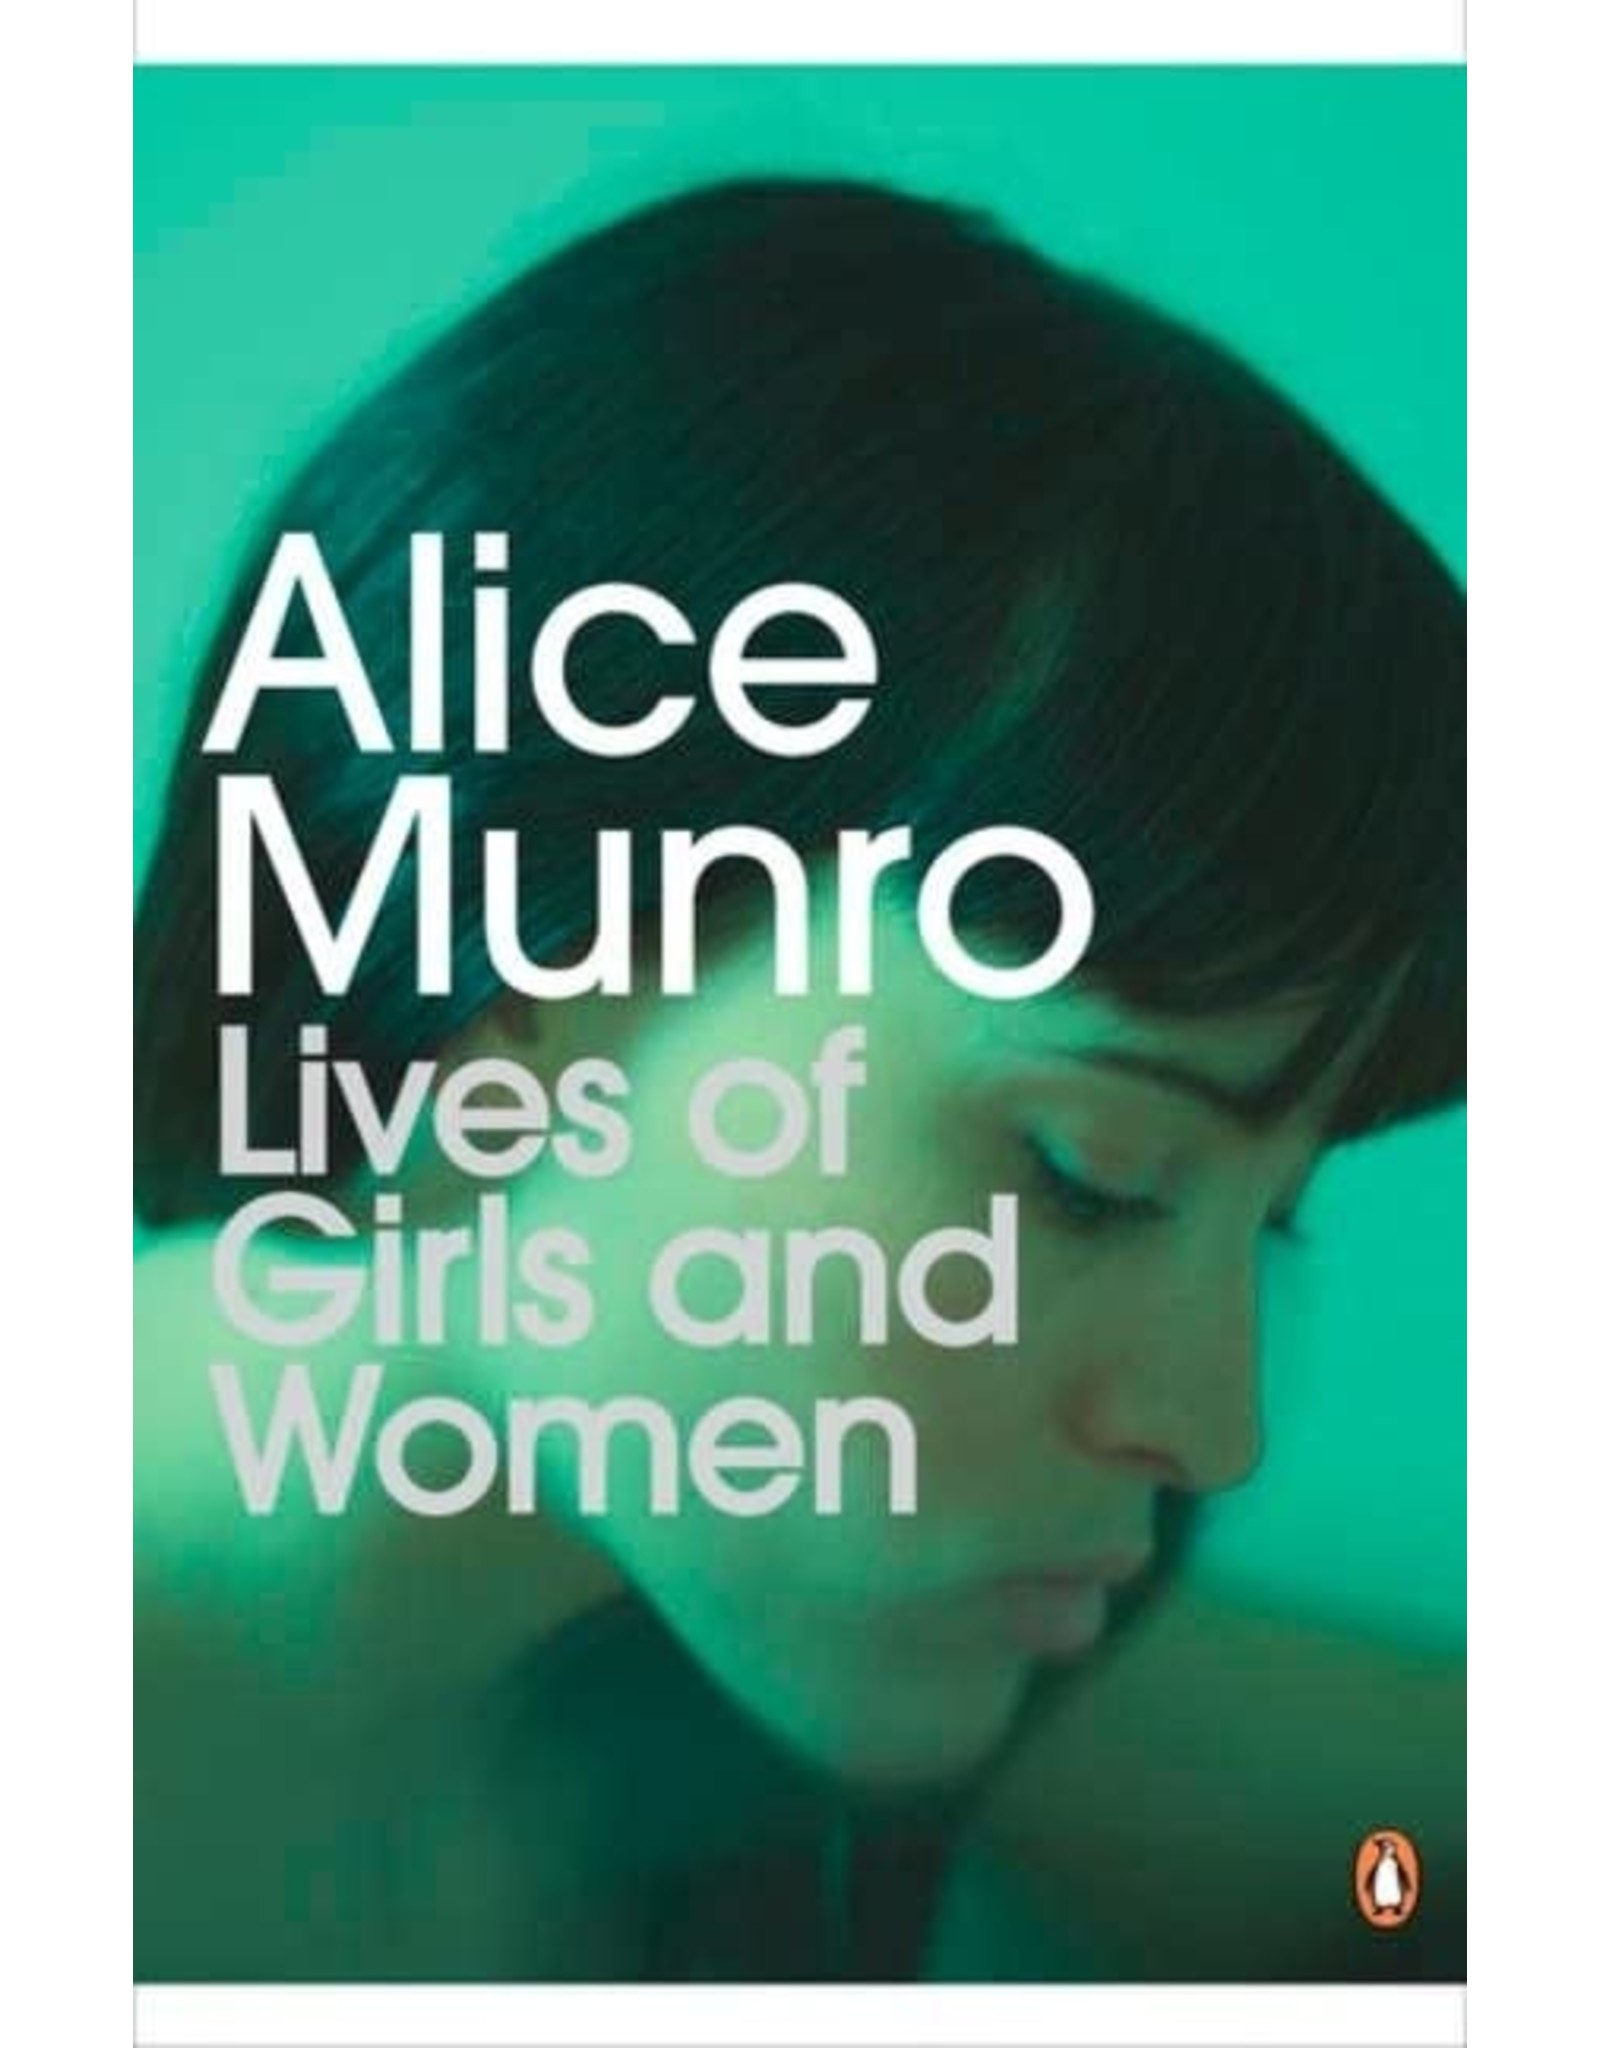 Literature Lives of Girls and Women